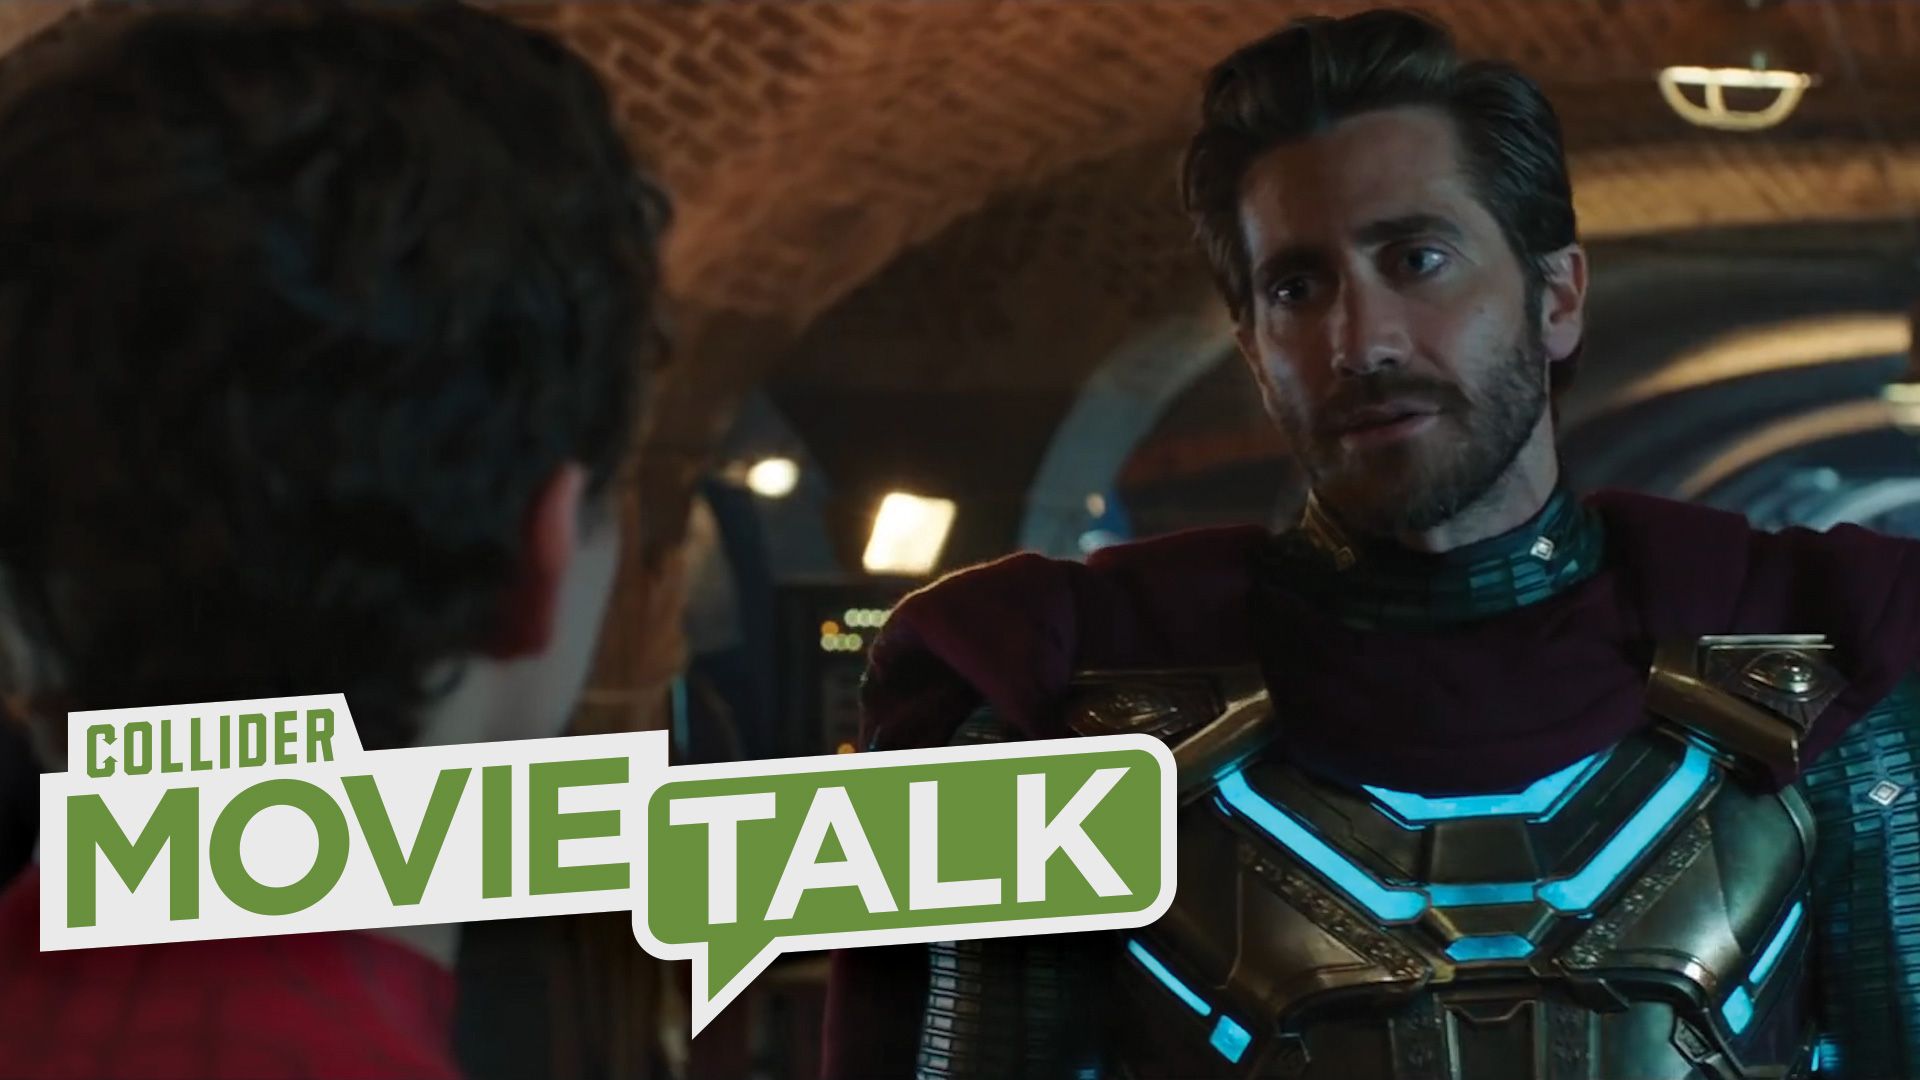 Spider-Man: Far From Home: Is Mysterio Lying about the MCU Multiverse? | Collider1920 x 1080